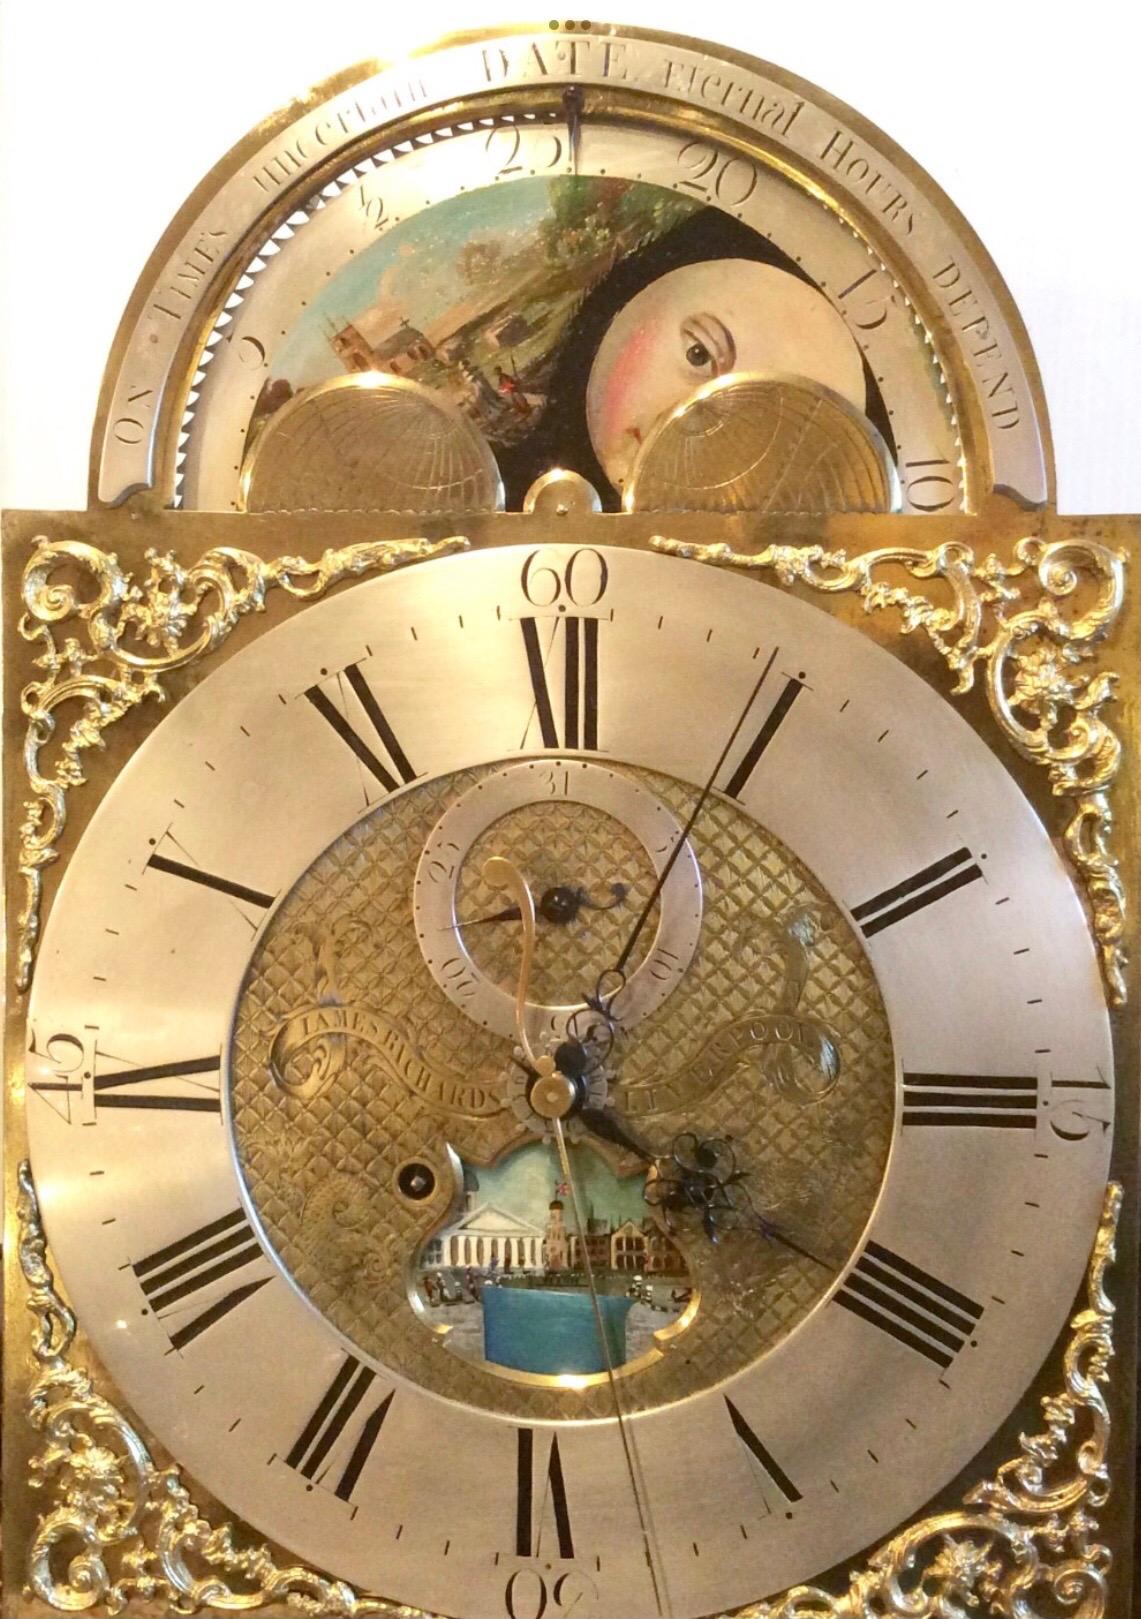 An important rare exceptional inlaid mahogany antique Georgian 18th century longcase grandfather clock by iames richards liverpool featuring rolling moon, an alarm and ferguson tidal dial.
The stunning case is veneered in best quality flame